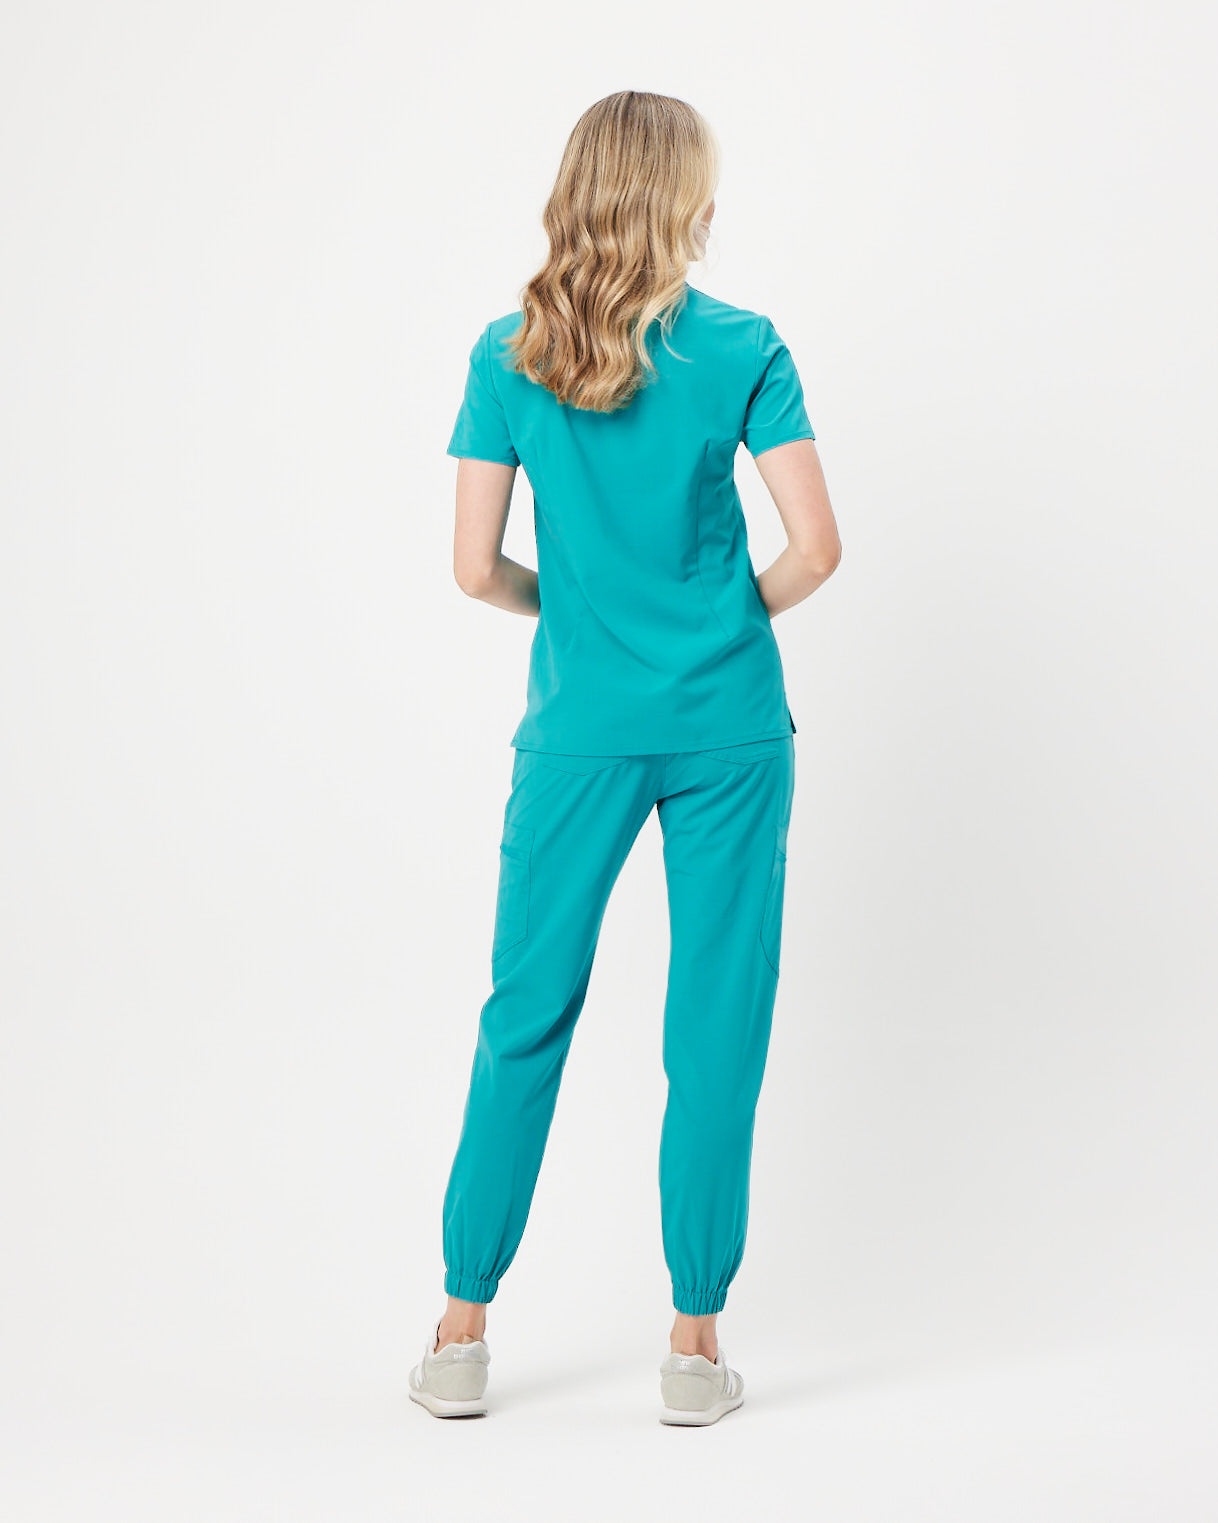 Cute And Stylish Medical Scrubs Upbeat Soles Orlando, 40% OFF